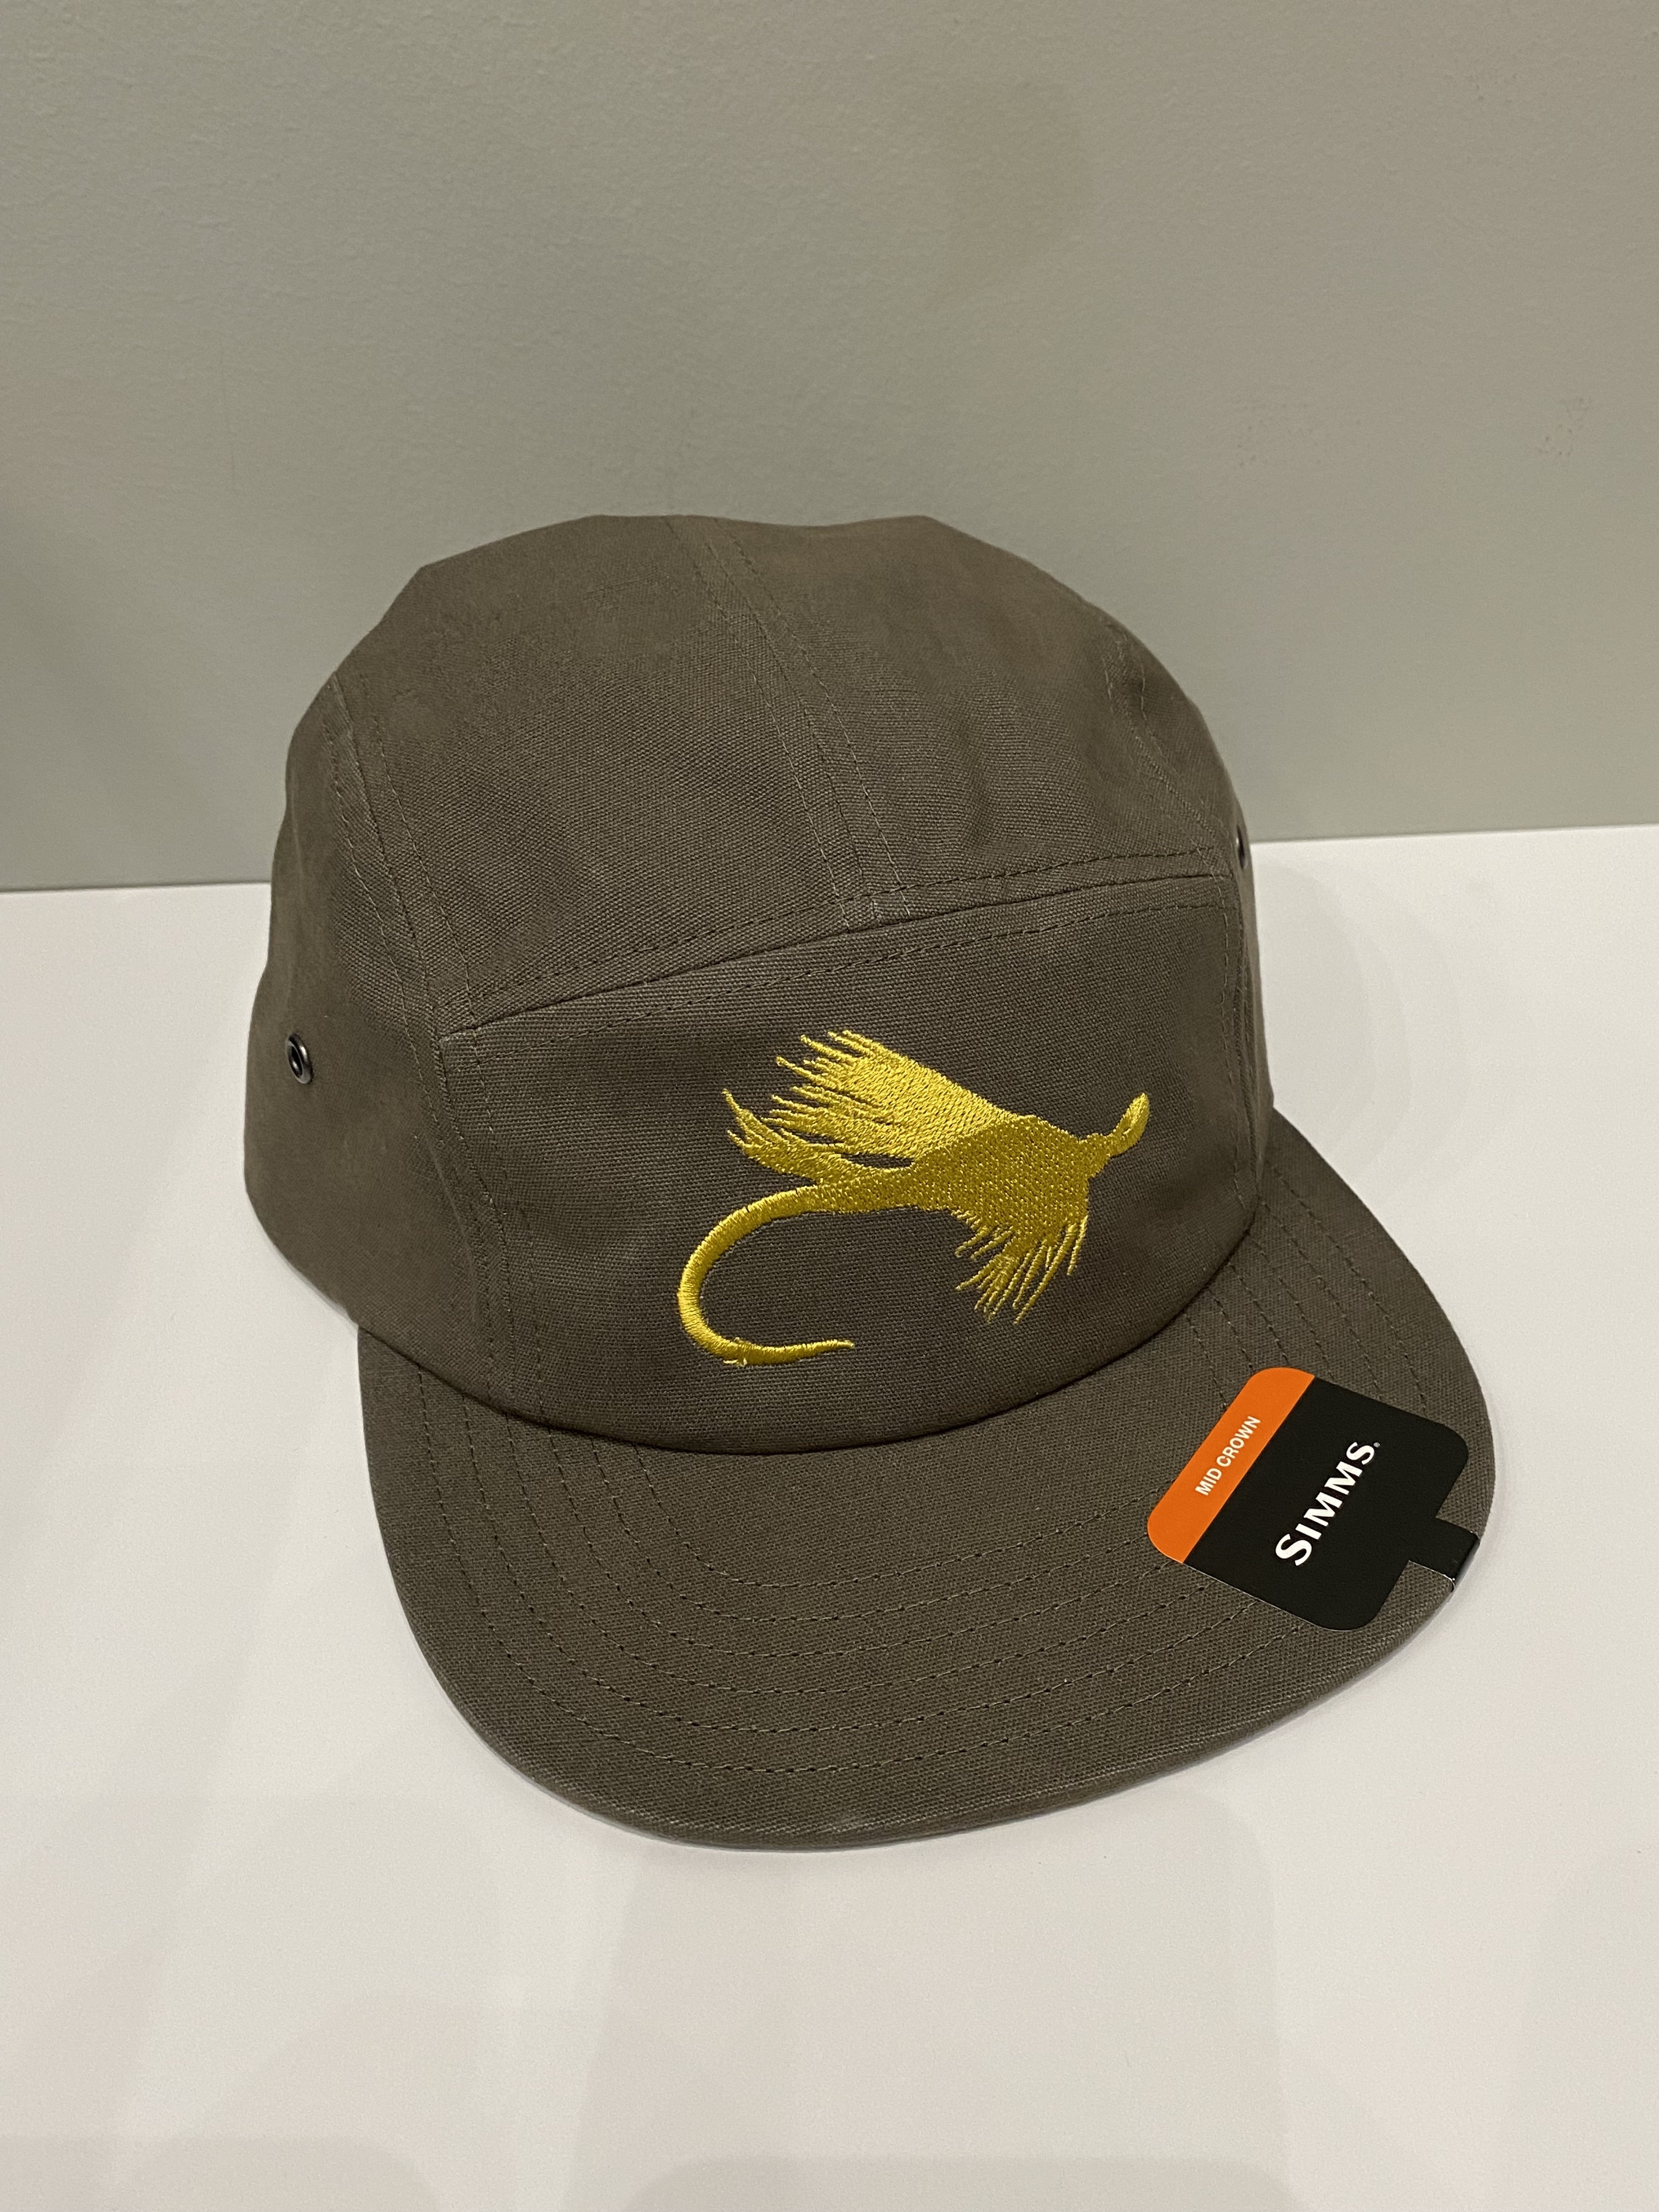 AROC / SIMMS Camper Hat - Atlantic Rivers Outfitting Company